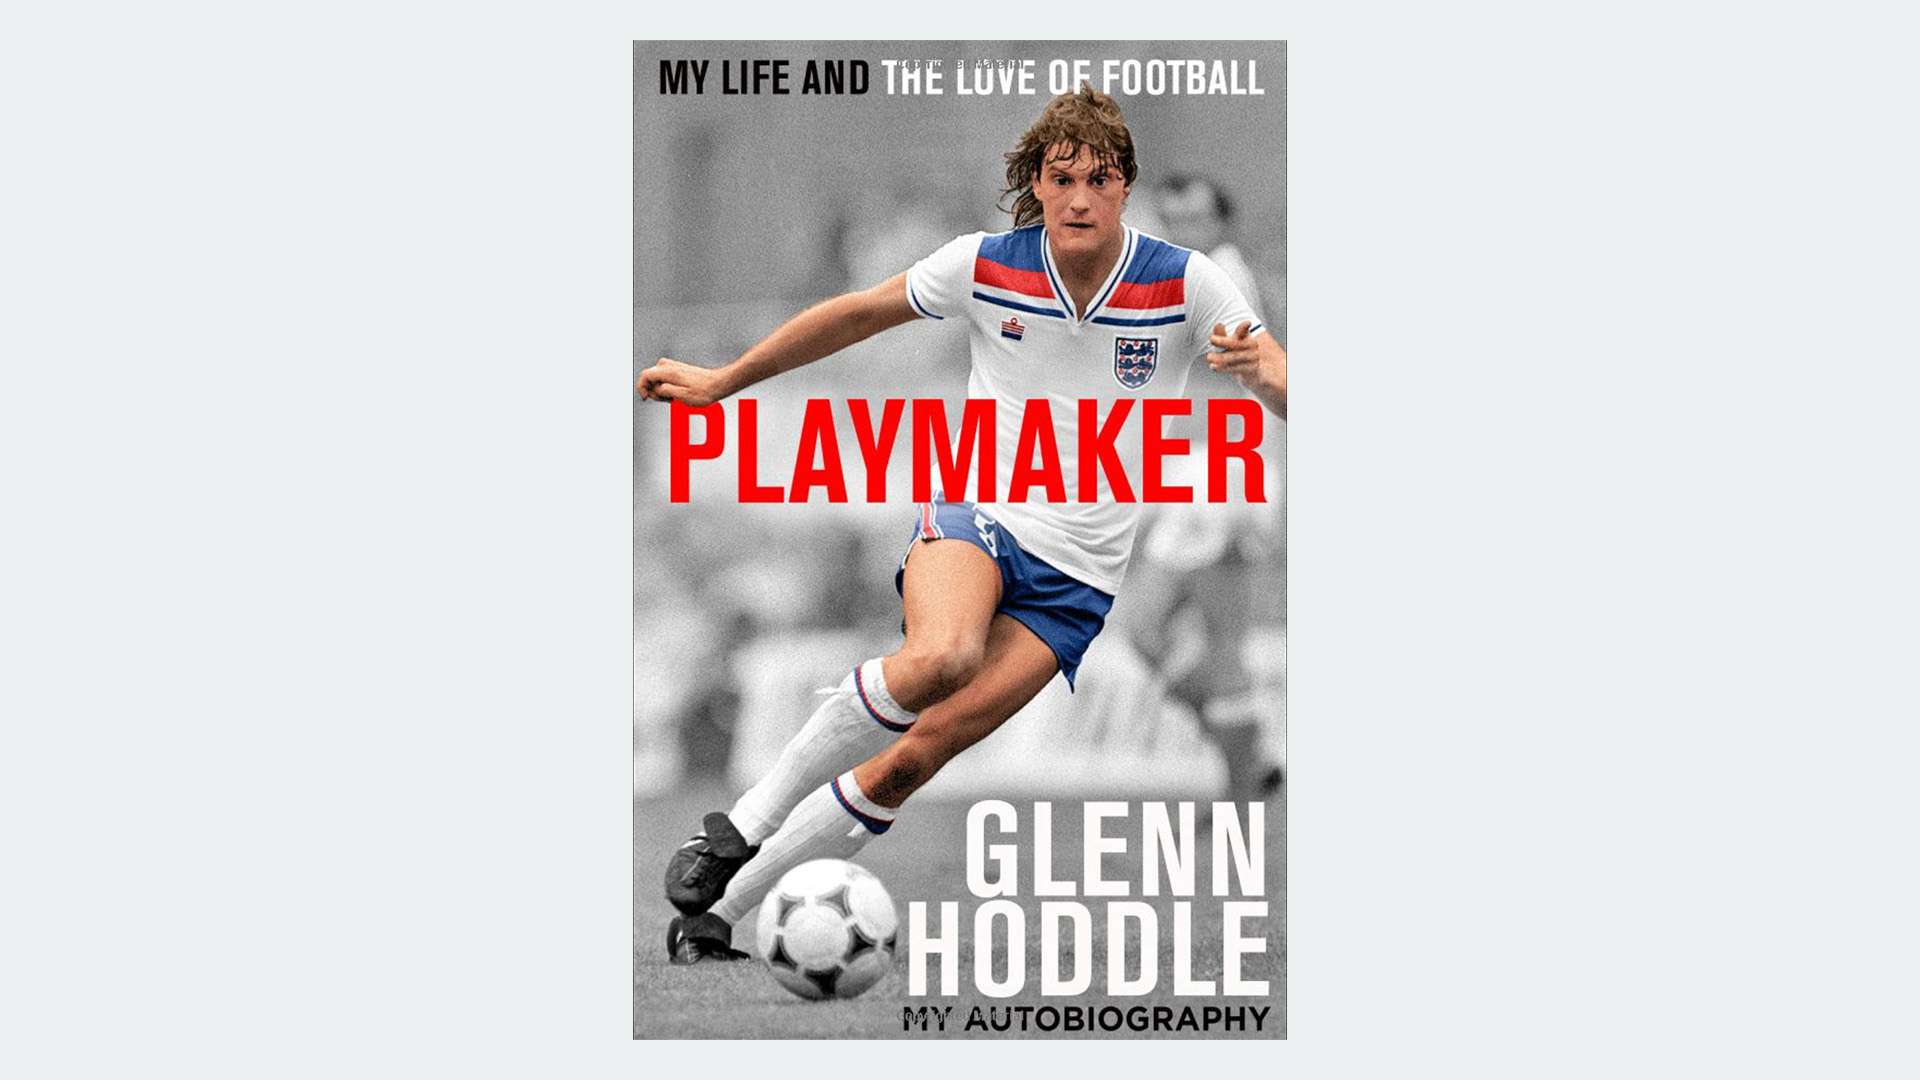 Playmaker: My Life and the Love of Football by Glenn Hoddle